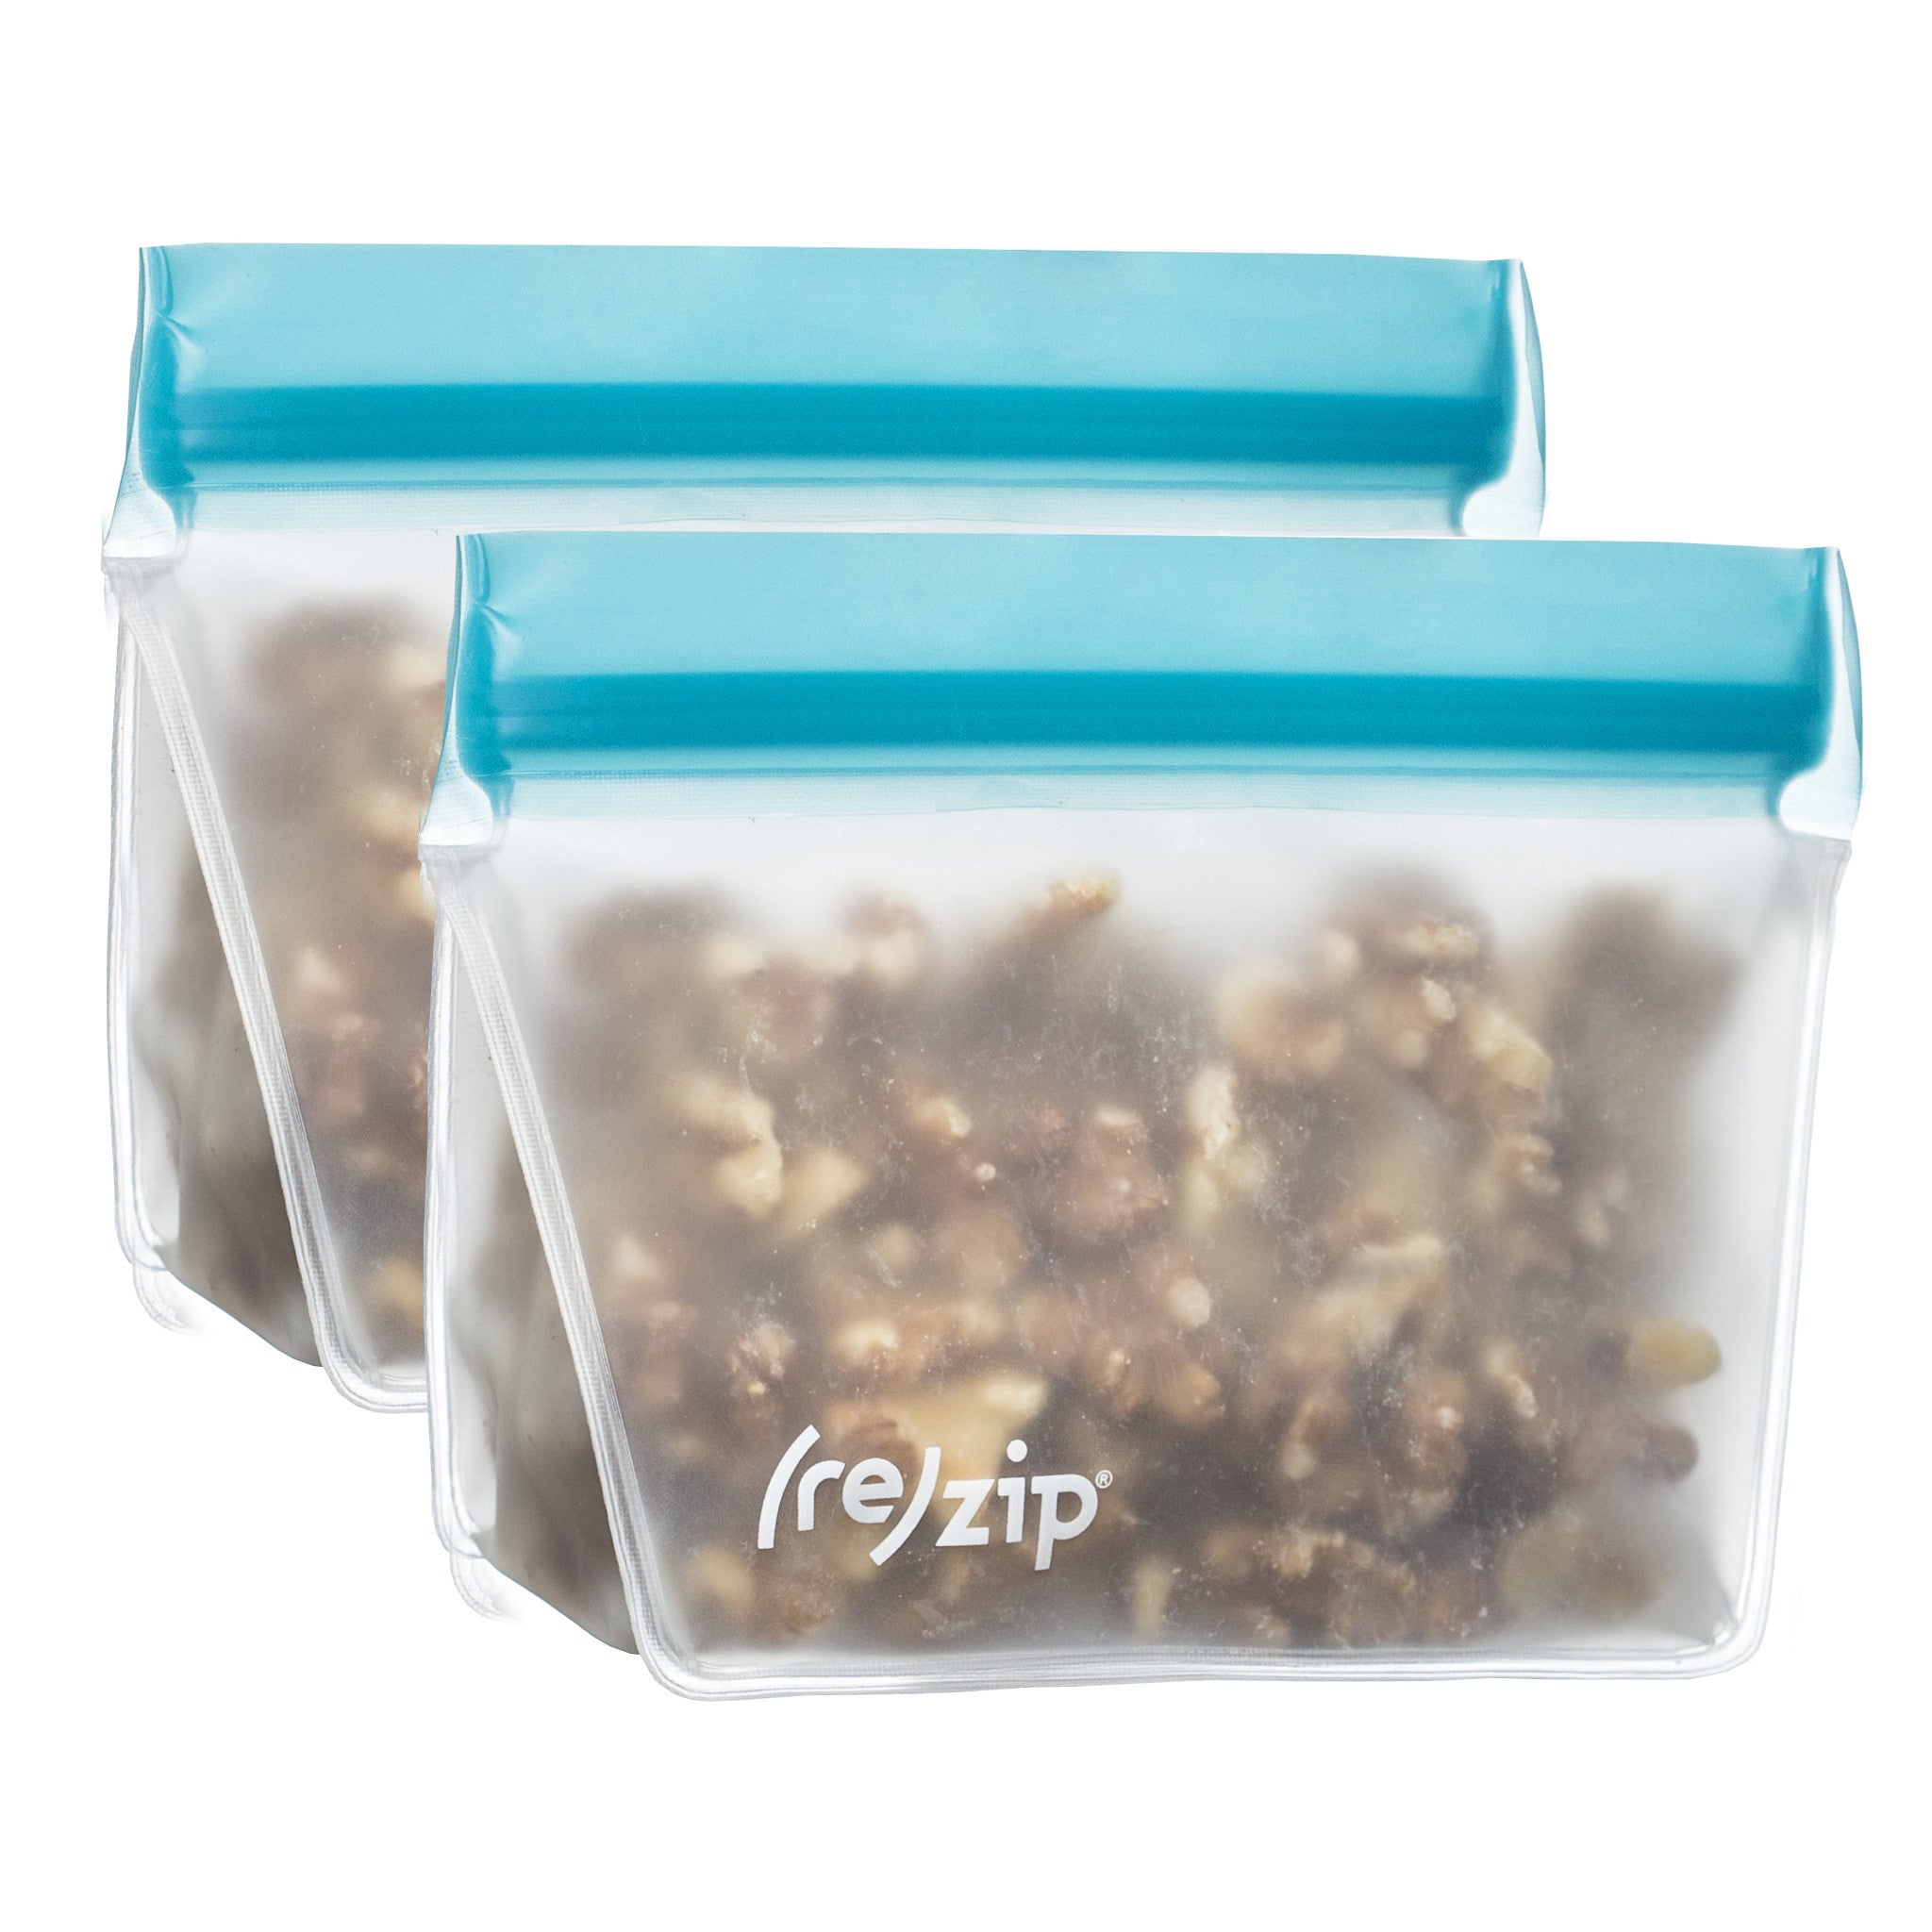 (re)zip Stand-up 1-Cup/8-ounce Leakproof Reusable Storage Bag 2-Pack (Aqua)